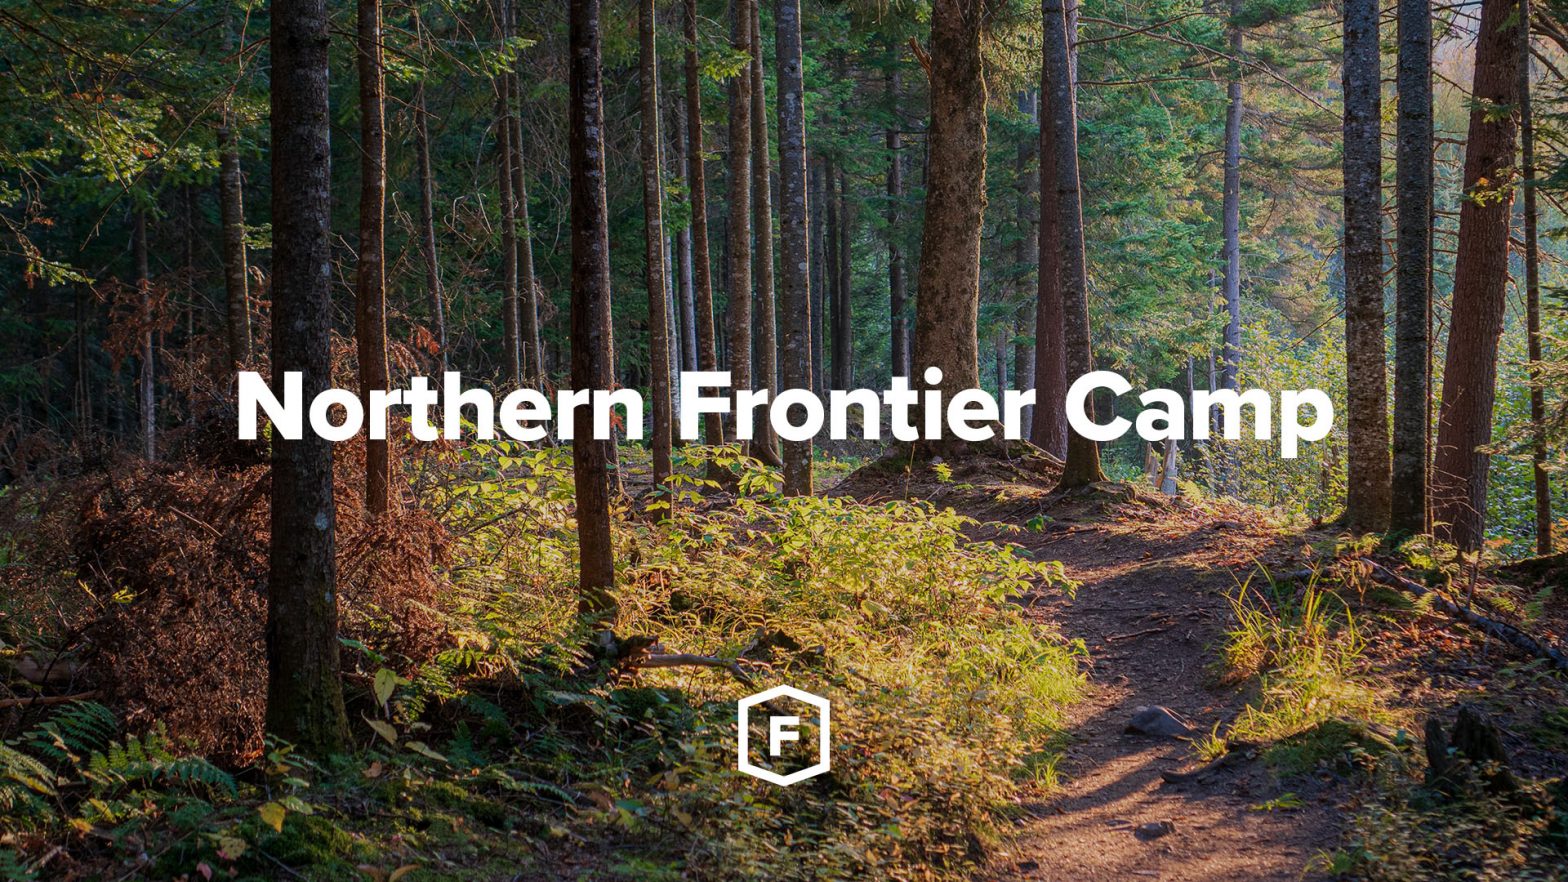 Northern Frontier Camp event image